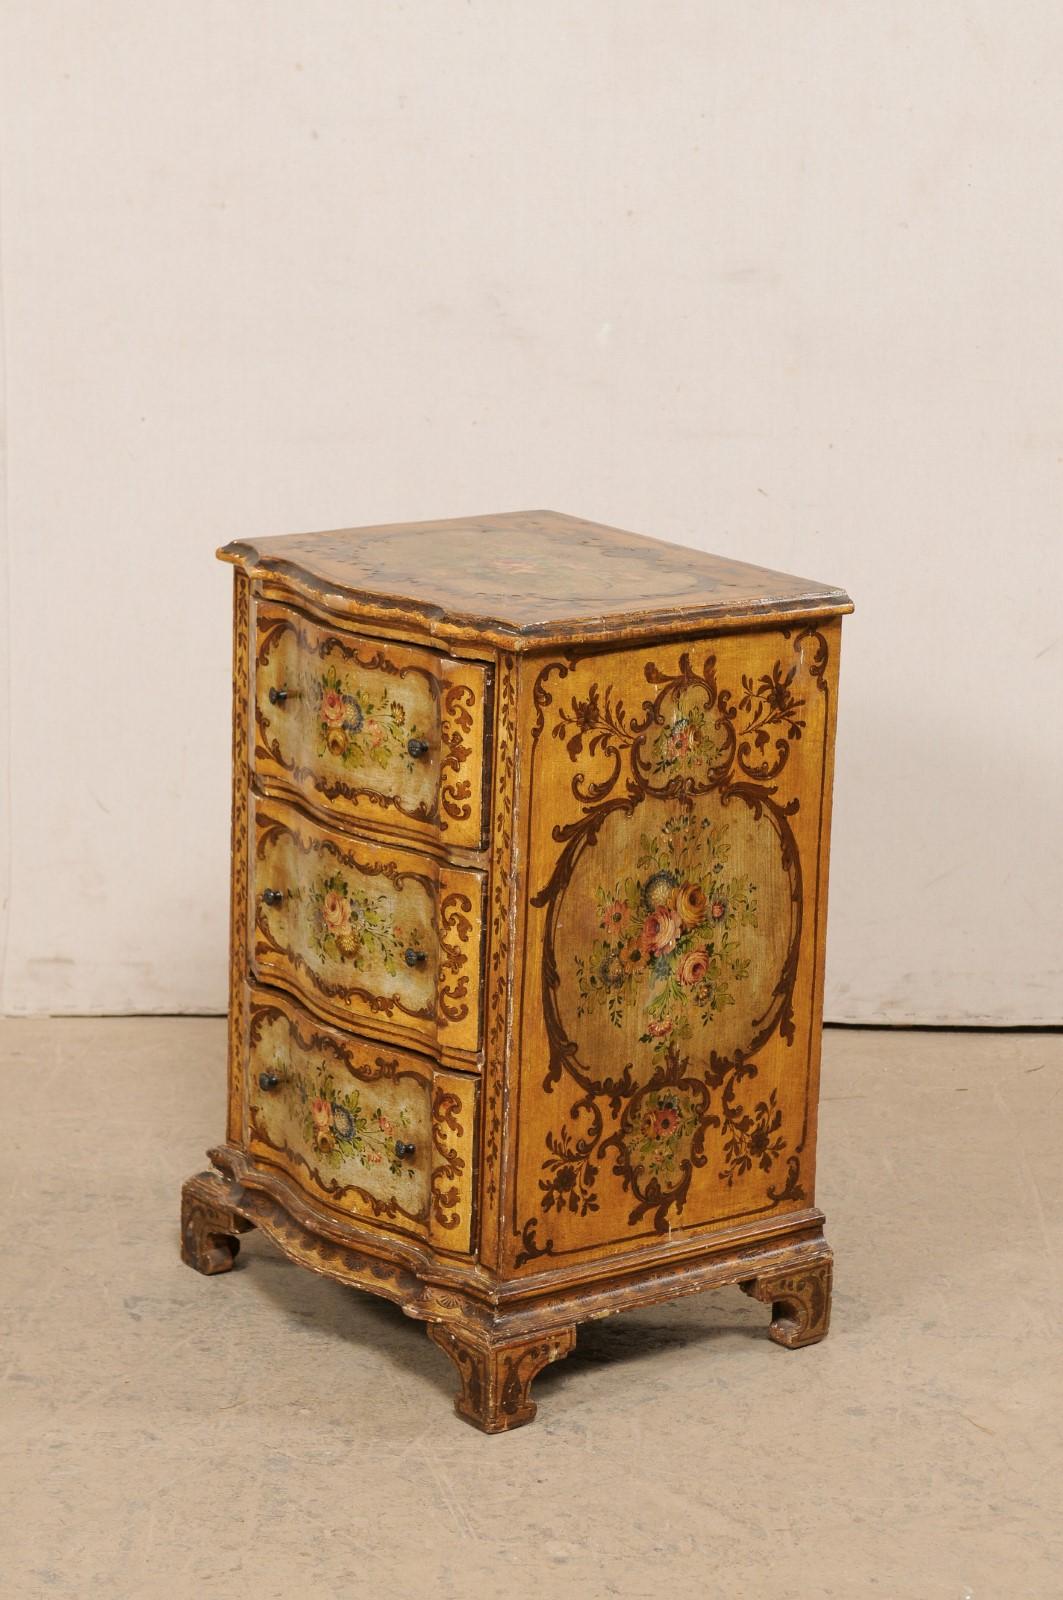 Italian 19th C. Petite Serpentine Chest with Hand-Painted Floral Embellishments For Sale 7